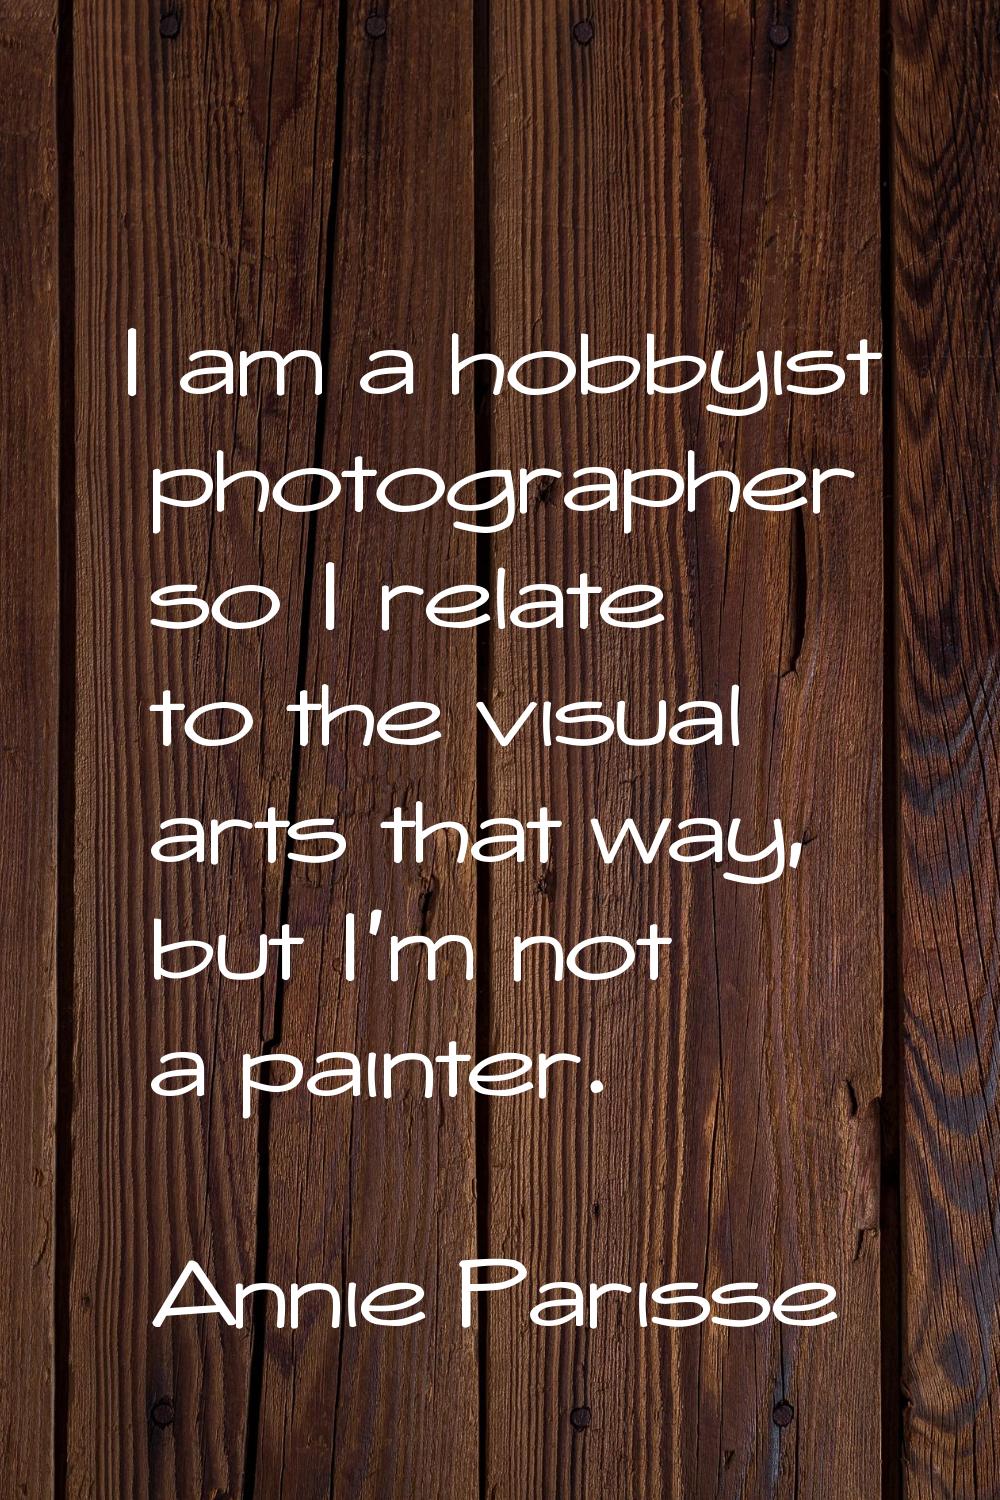 I am a hobbyist photographer so I relate to the visual arts that way, but I'm not a painter.